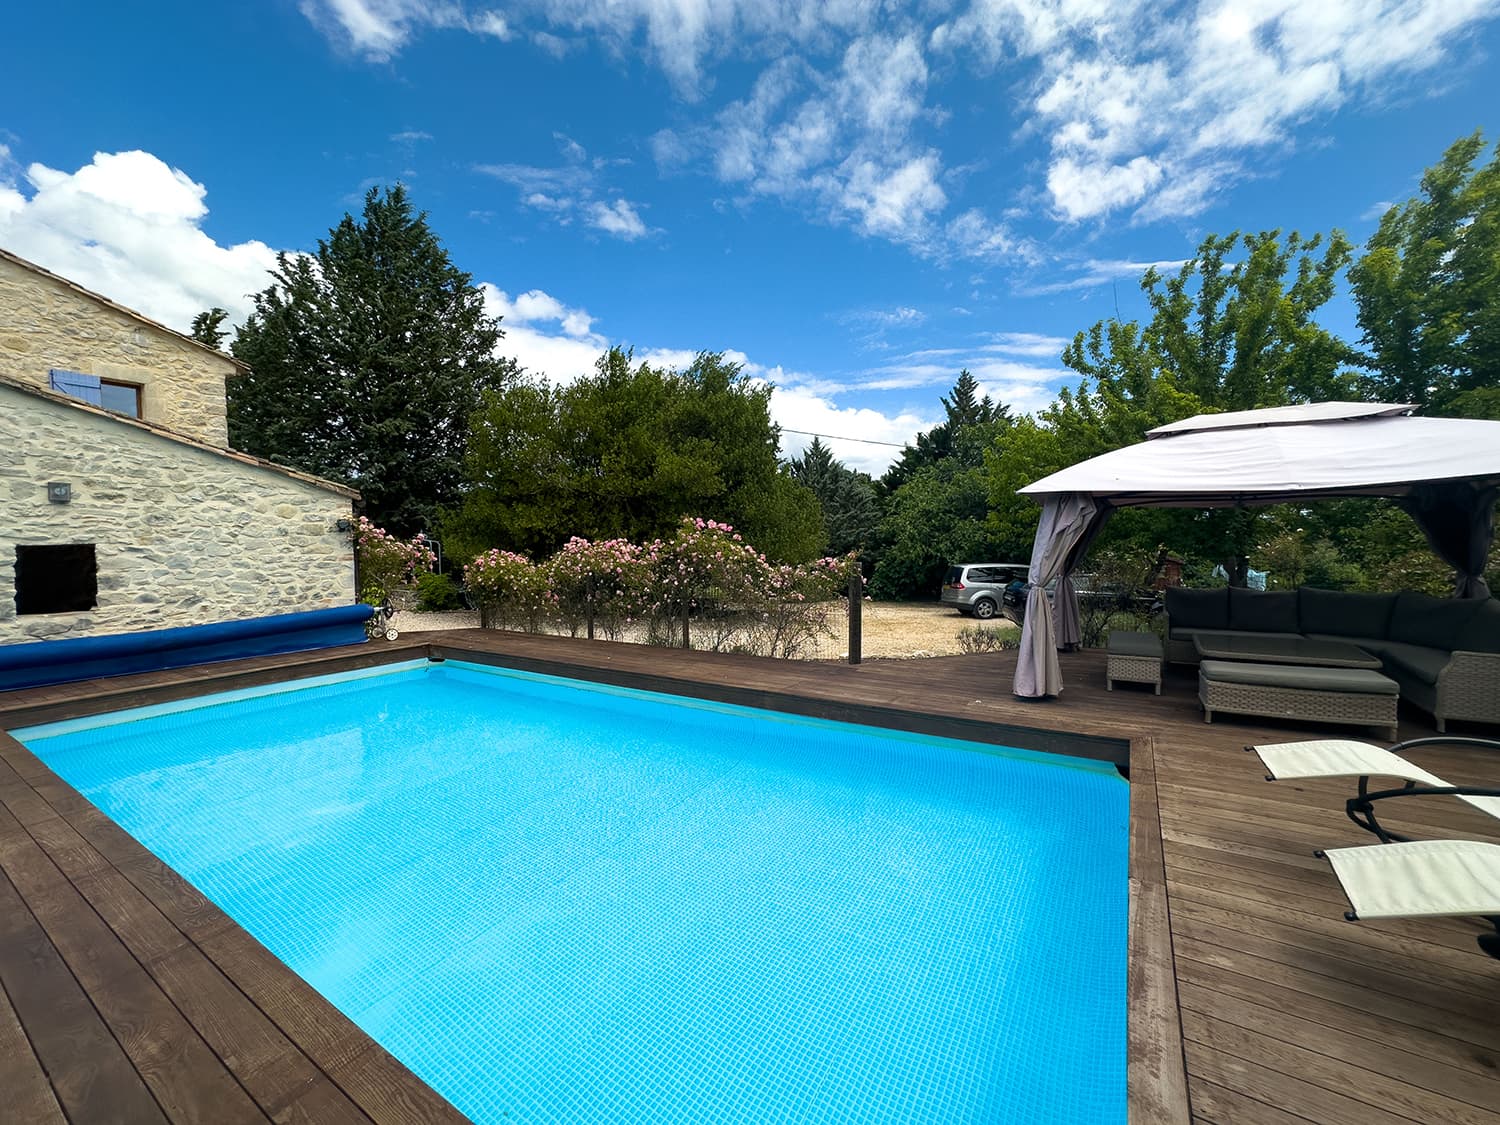 Holiday home with private pool in Gard, South of France